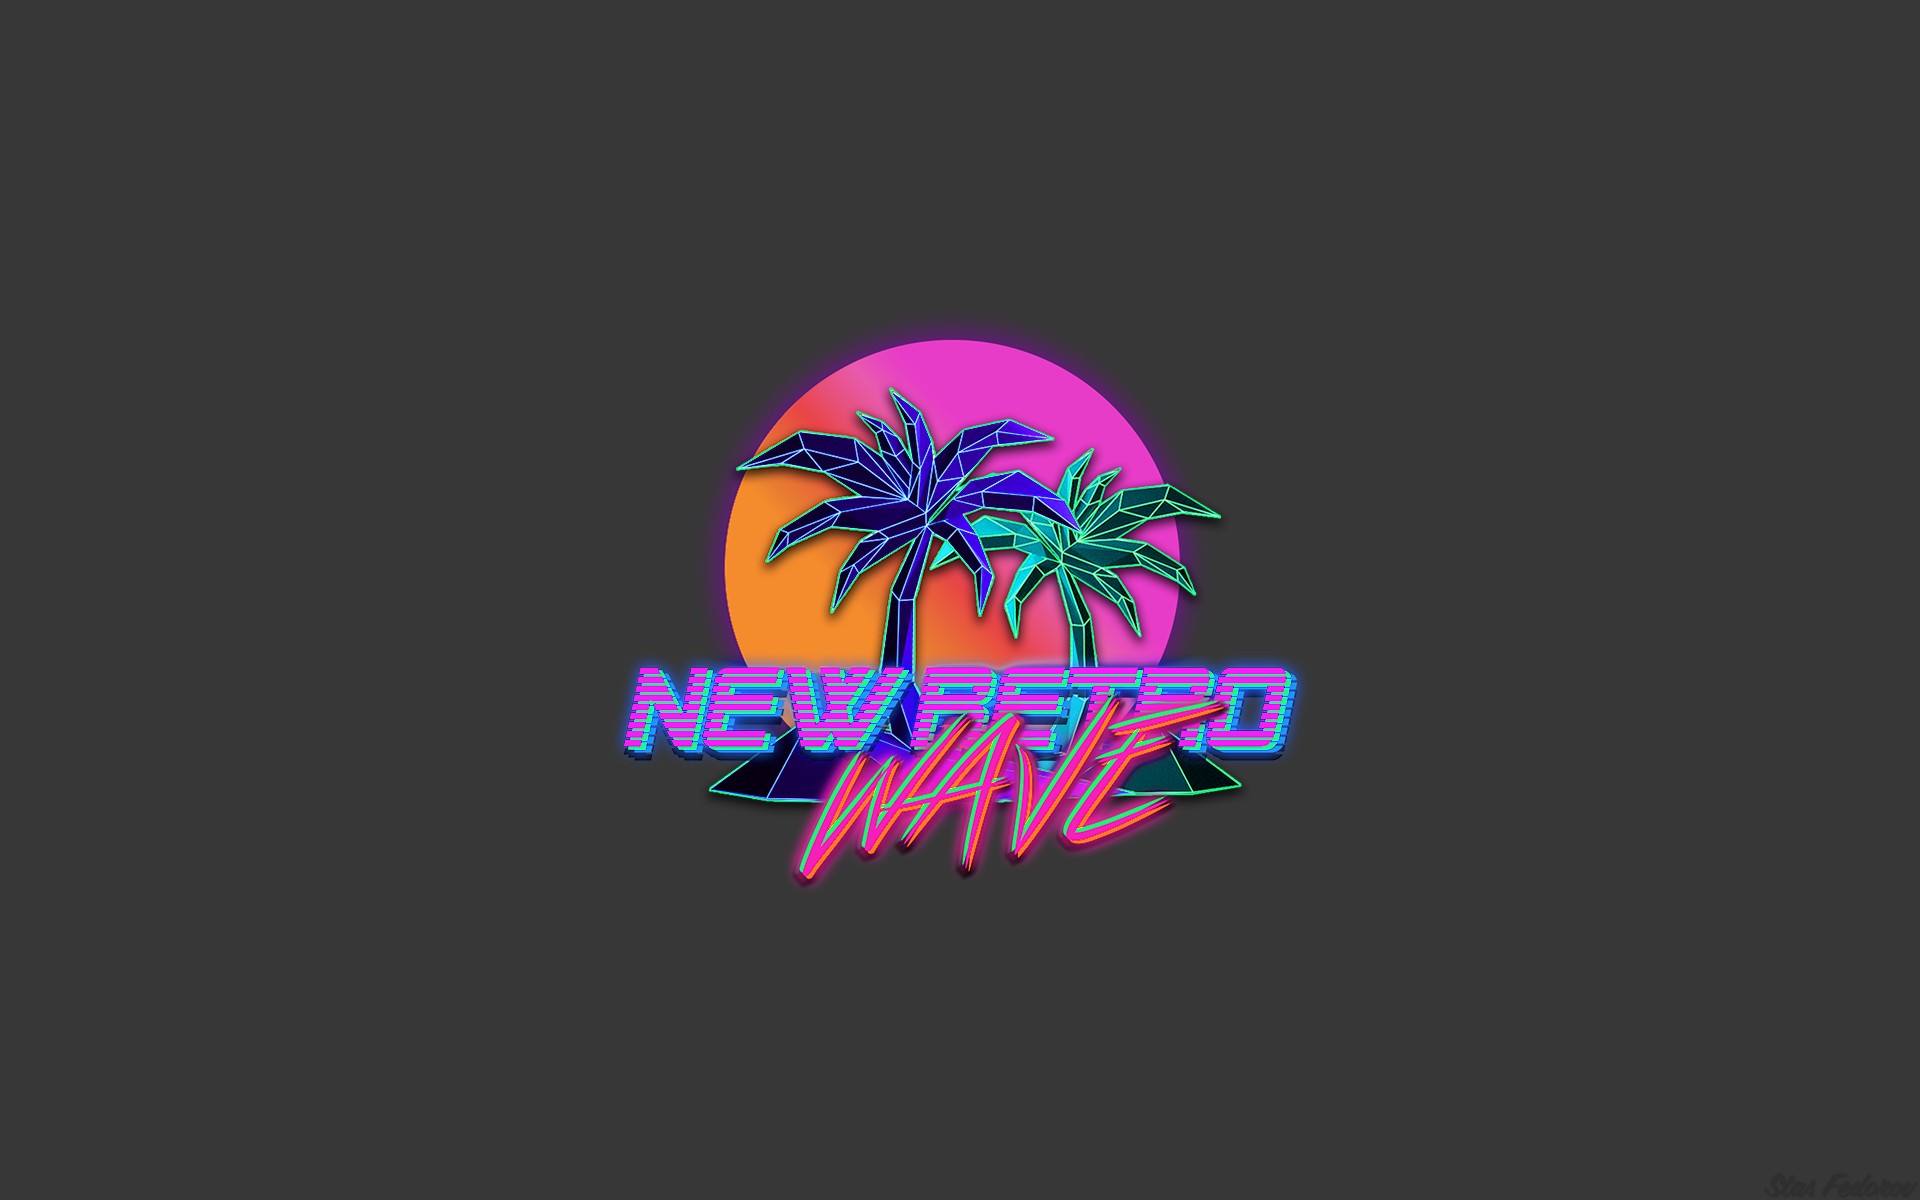 New Retro Wave, Typography, Photoshop, Synthwave, 1980s, Neon Wallpaper